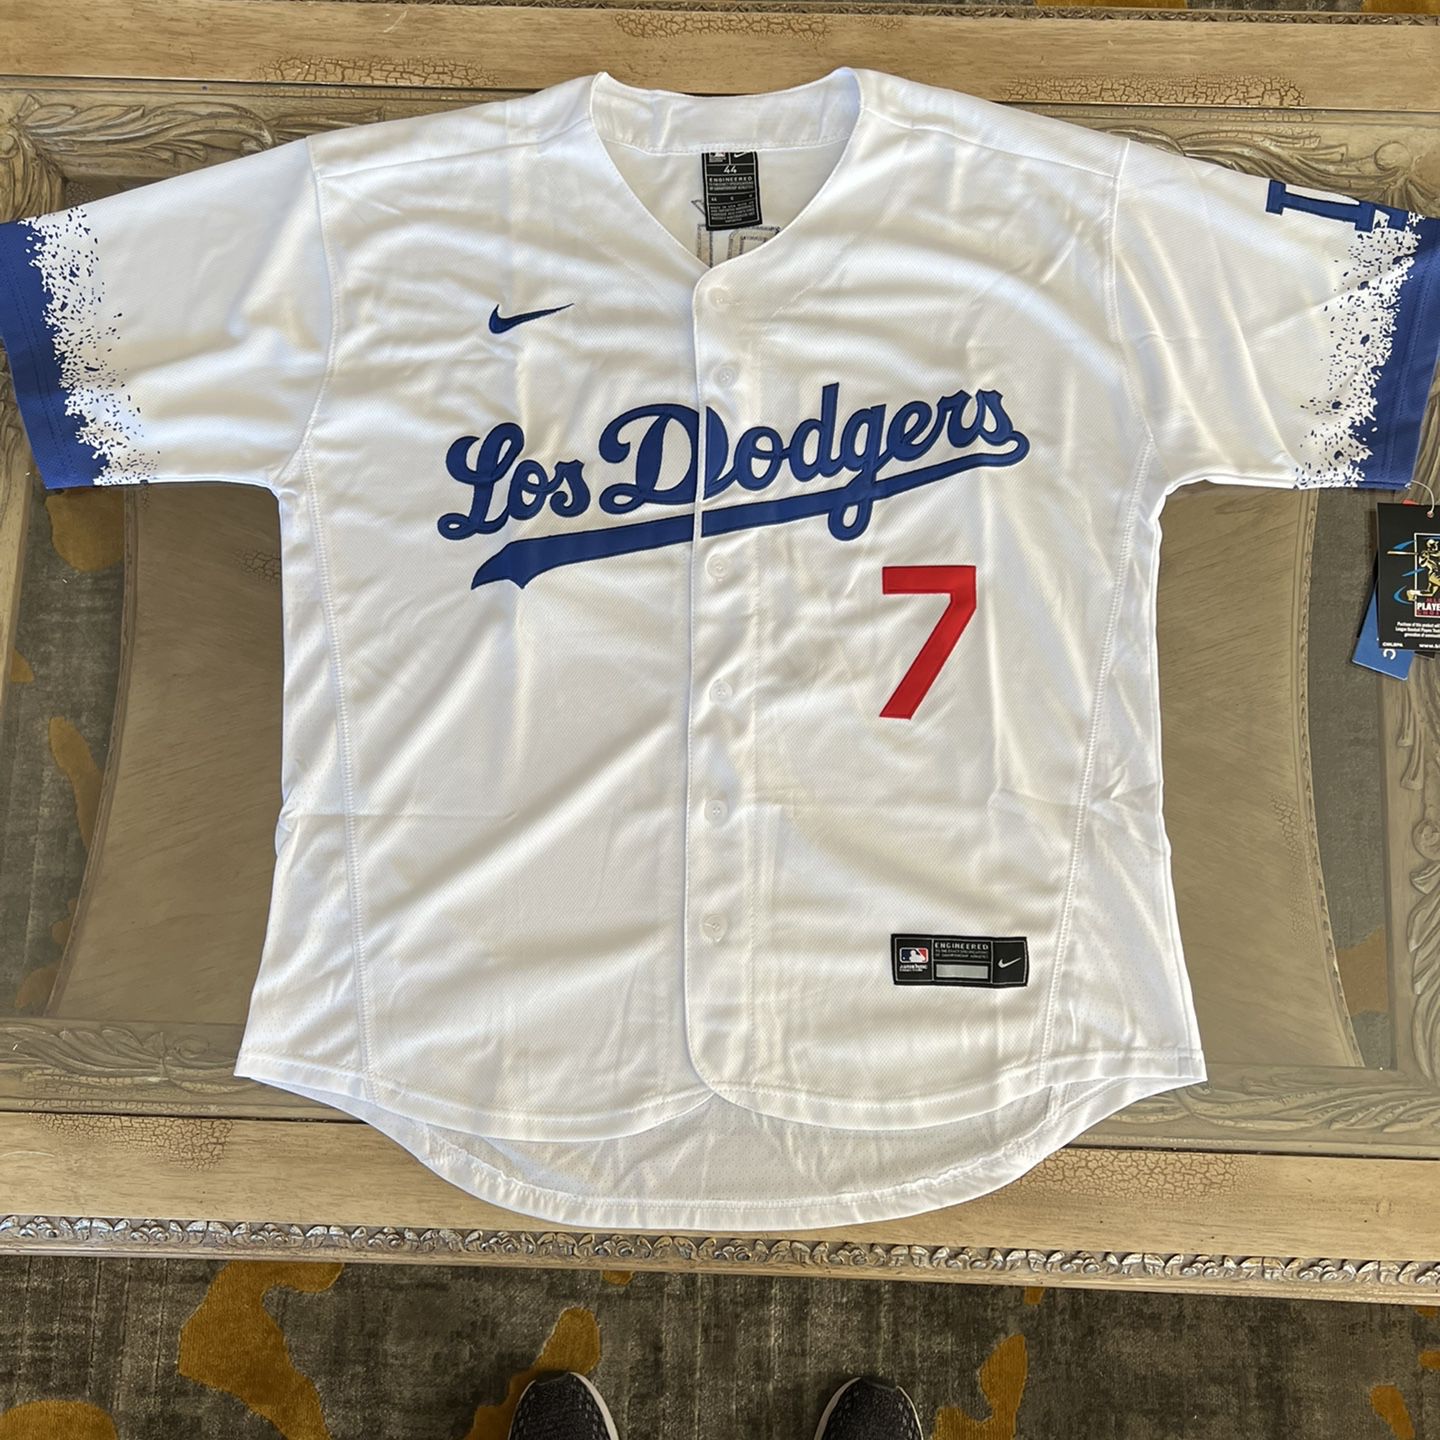 Los Angeles Dodgers Julio Urias Women's Jersey $50 for Sale in Covina, CA -  OfferUp